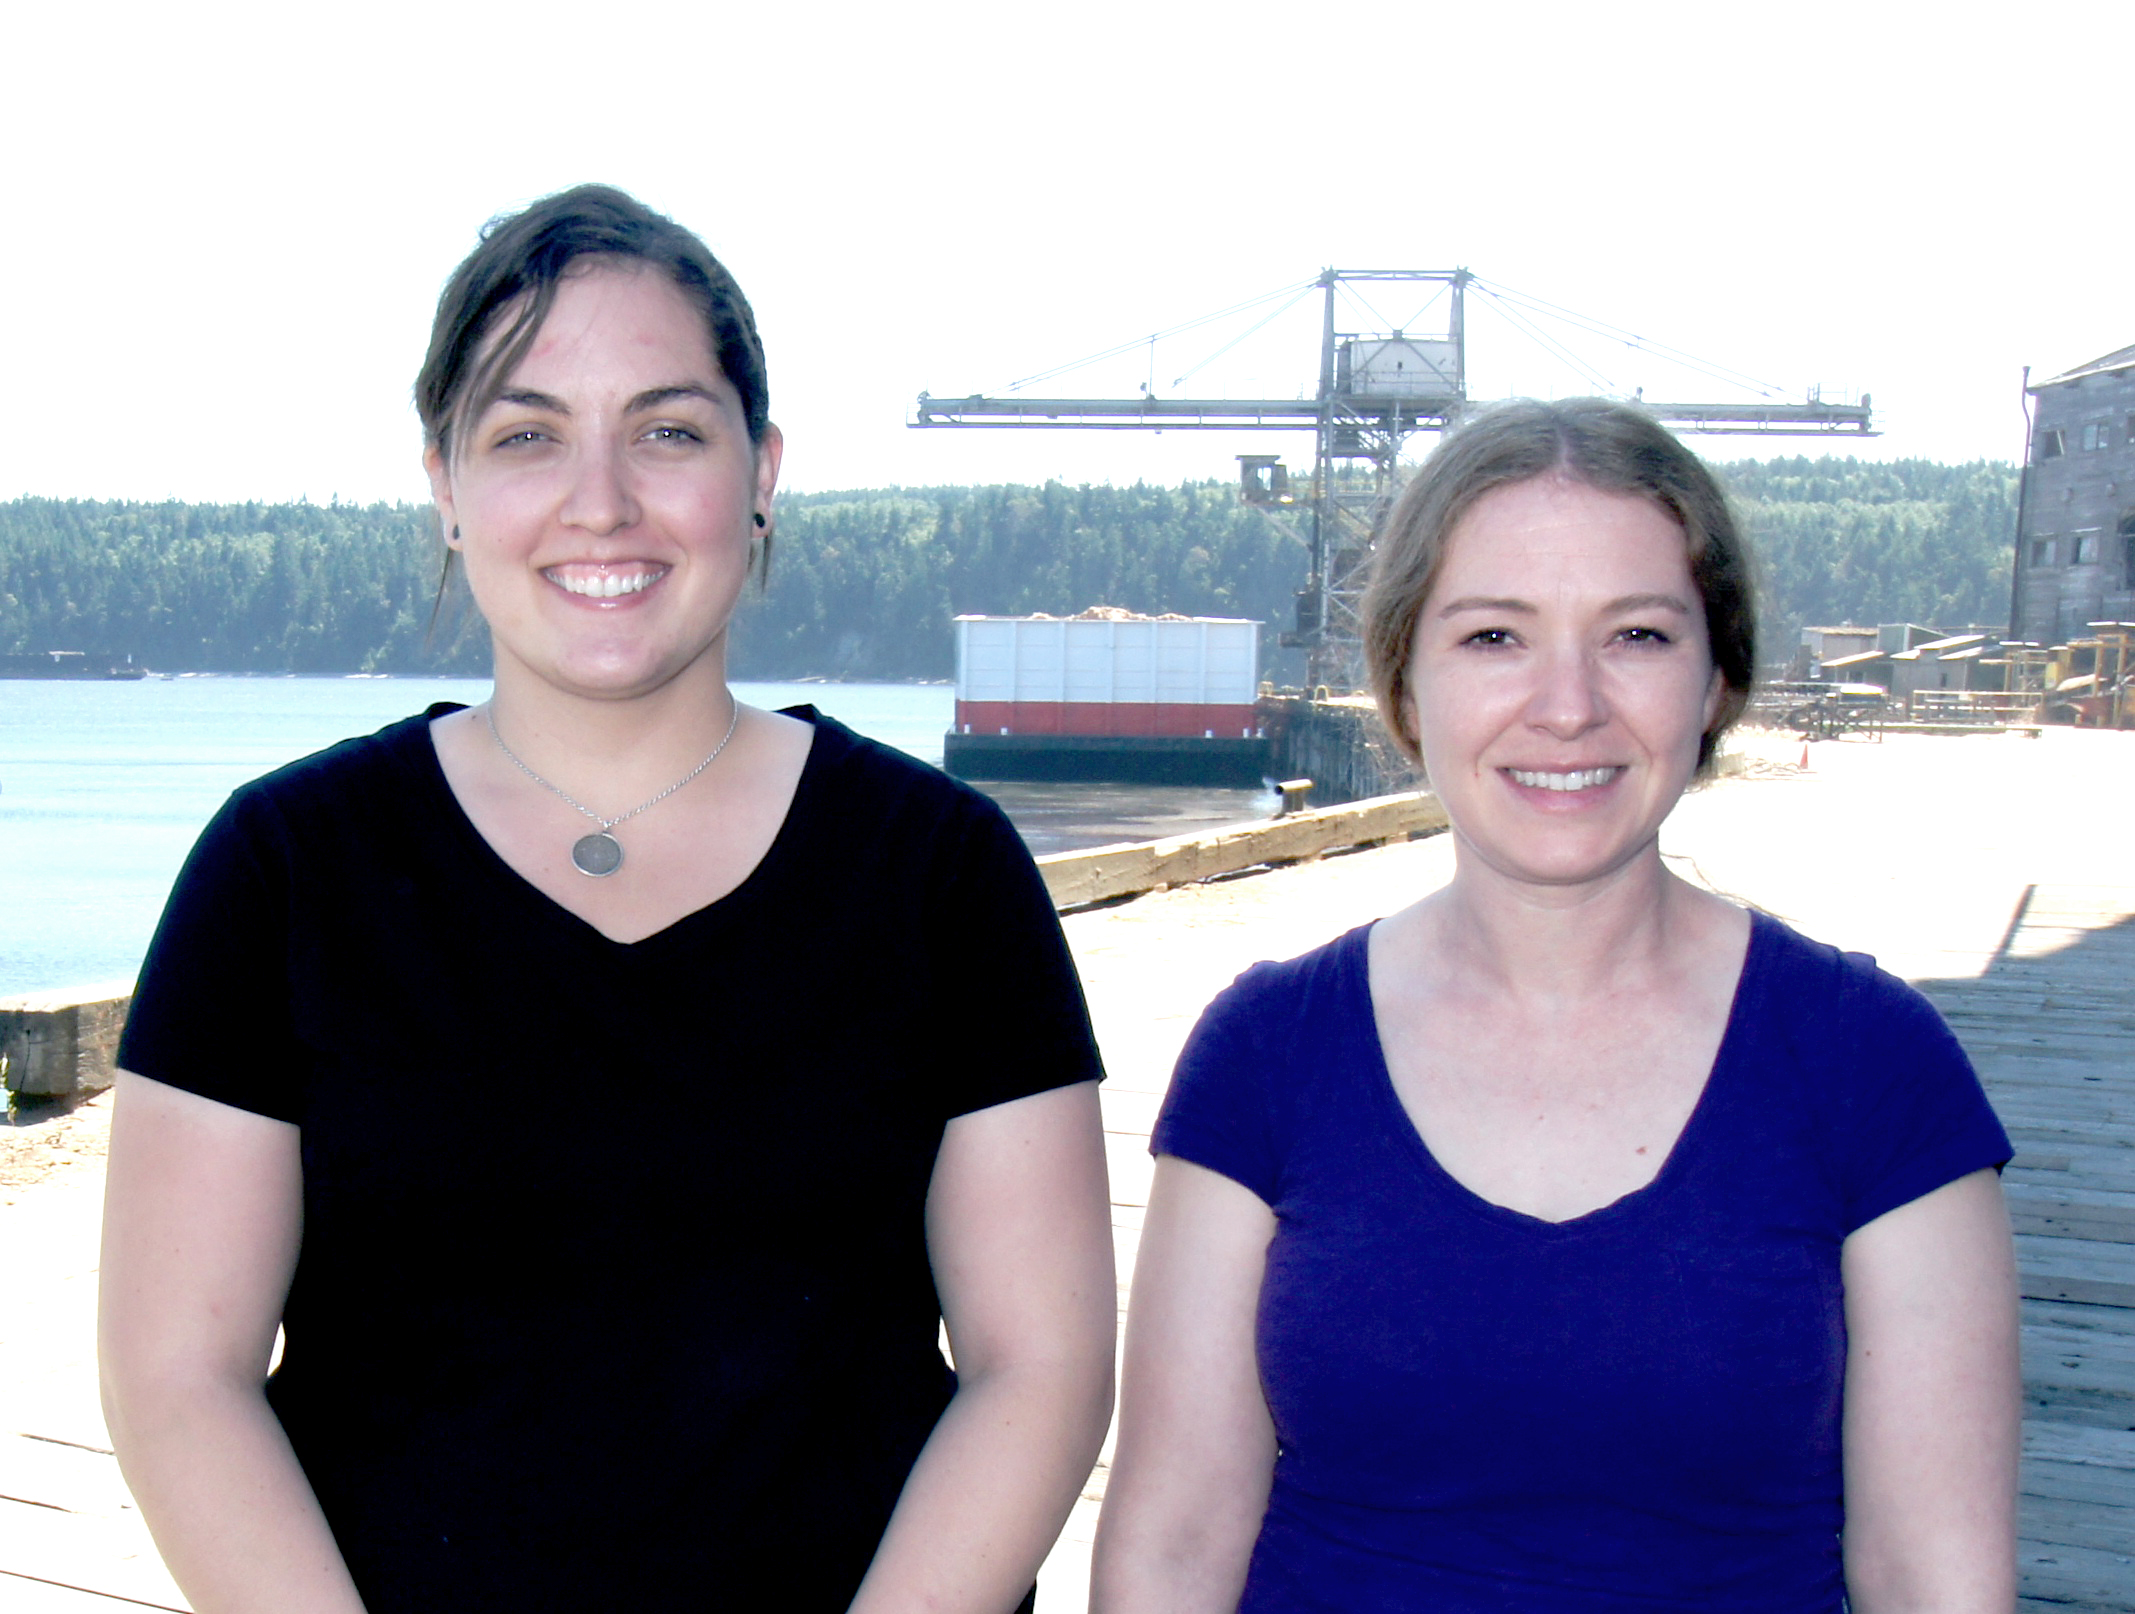 Port Townsend Paper has two summer interns this year: Brittany Huls